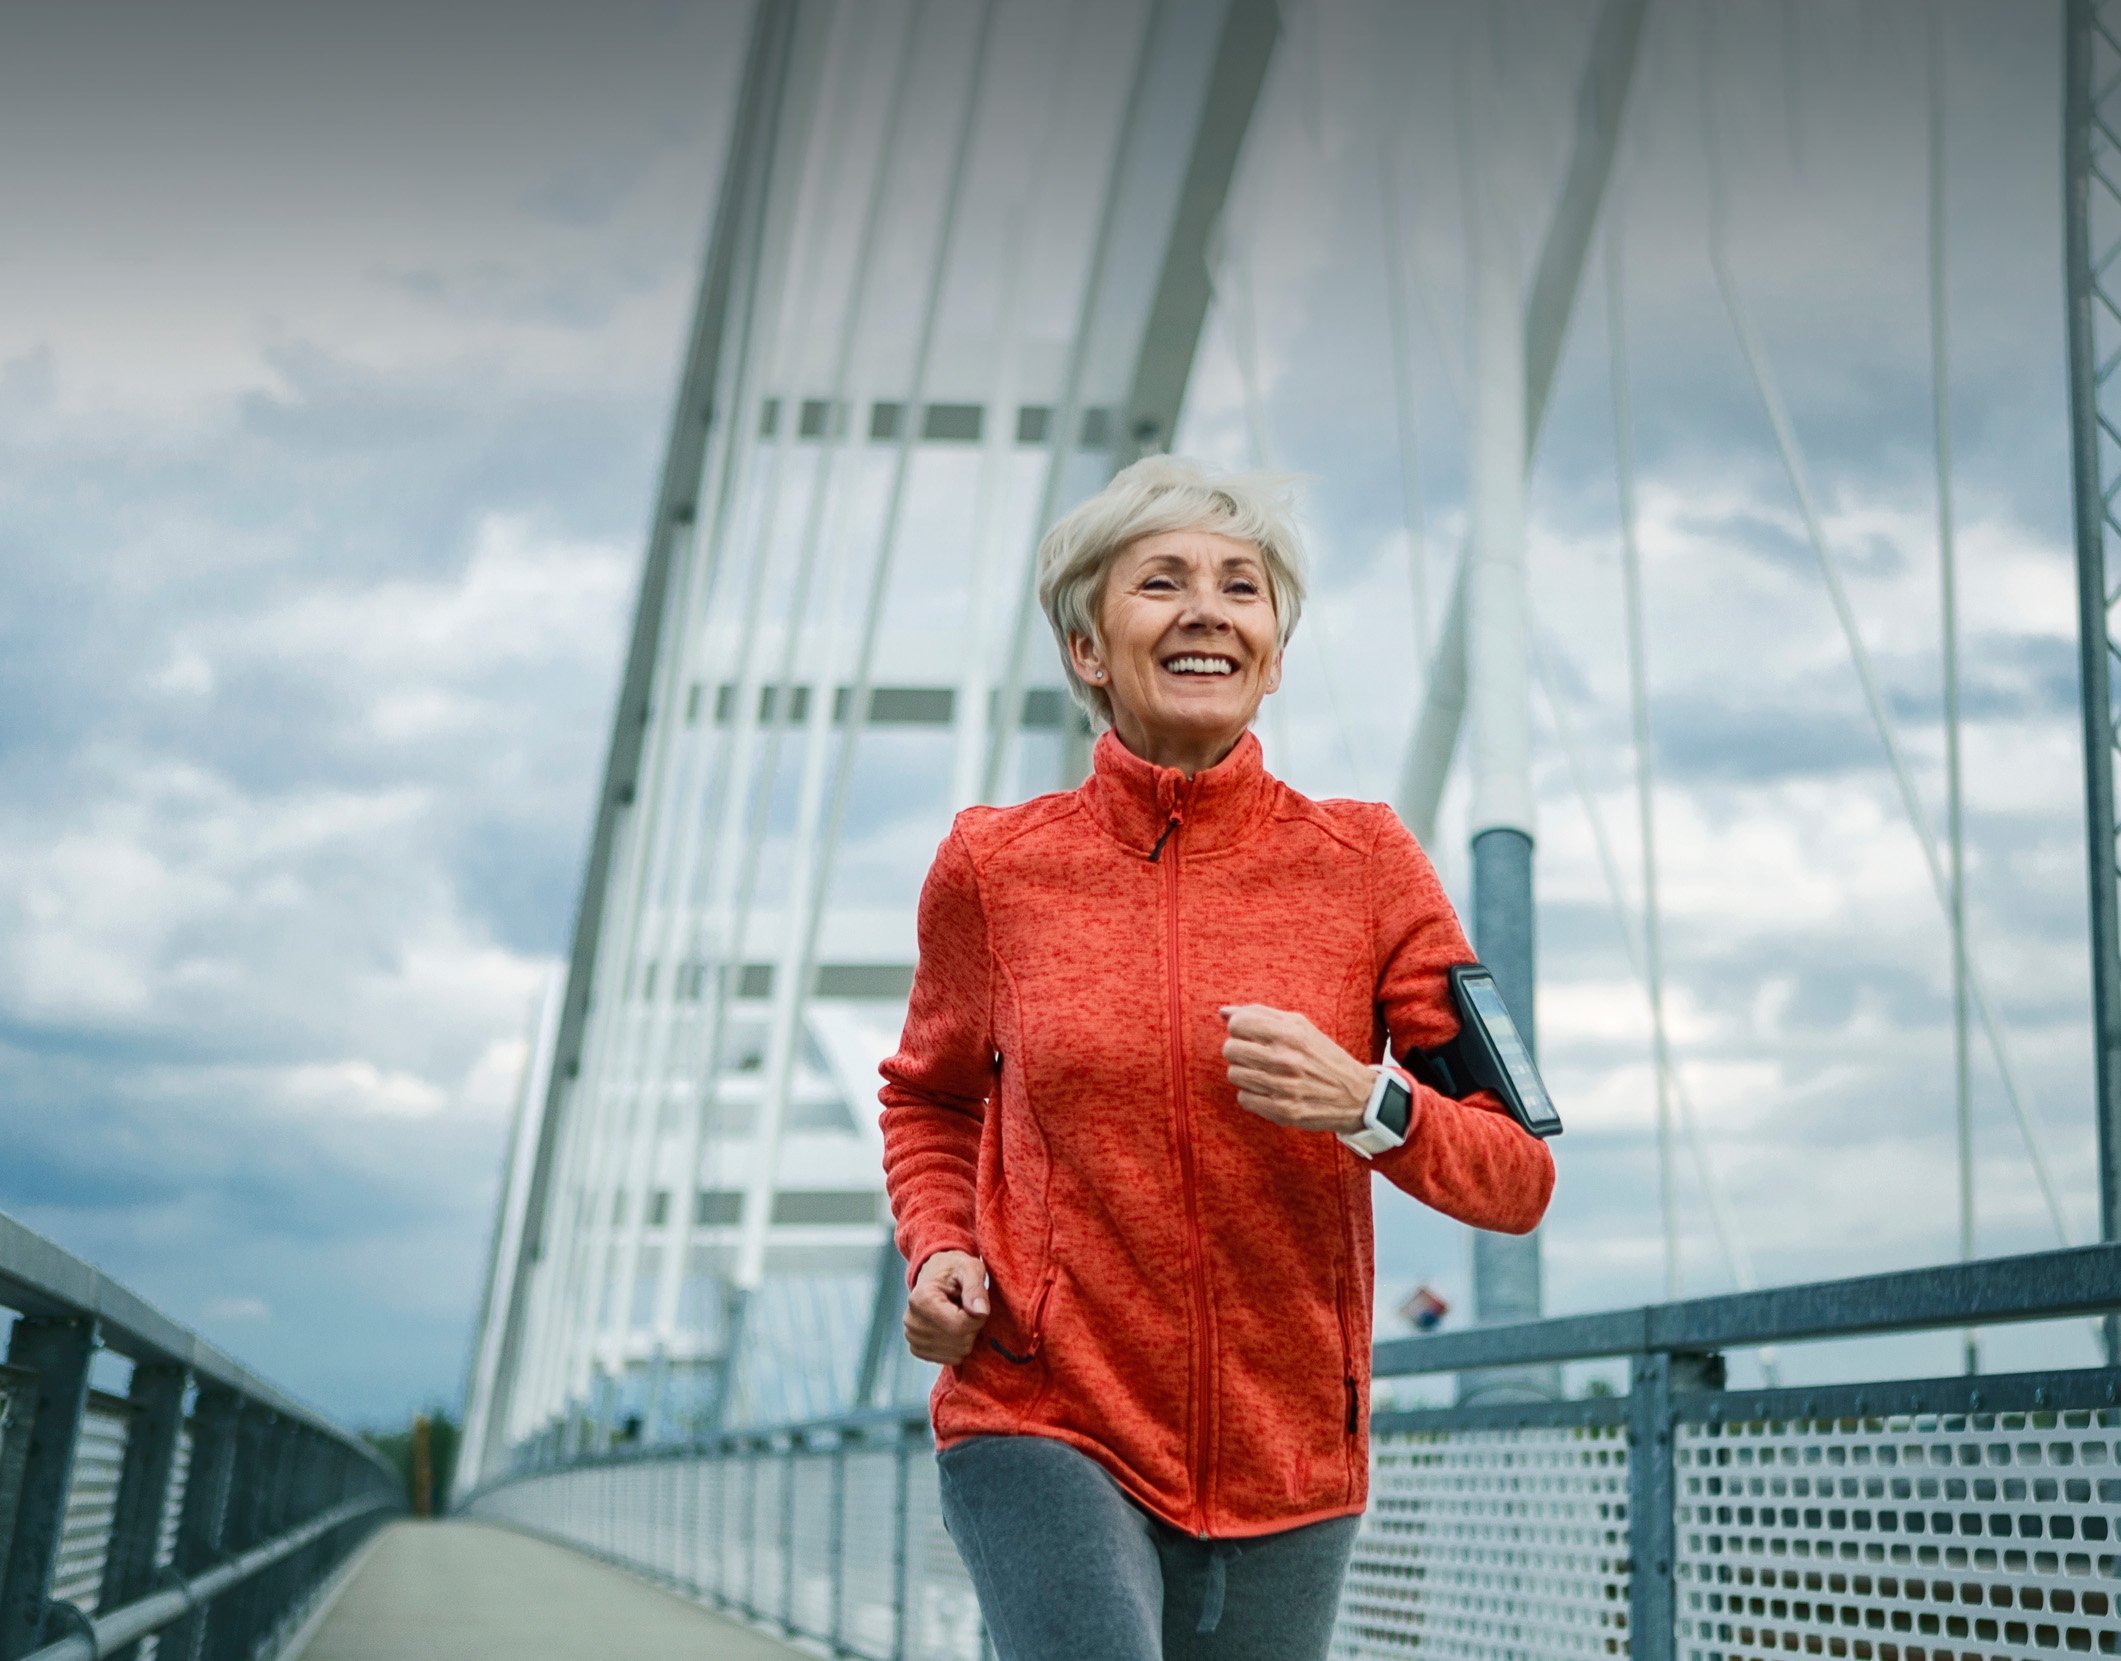 Physical Fitness Is Achievable at Any Age: A Conversation with Kathy Hill, NP